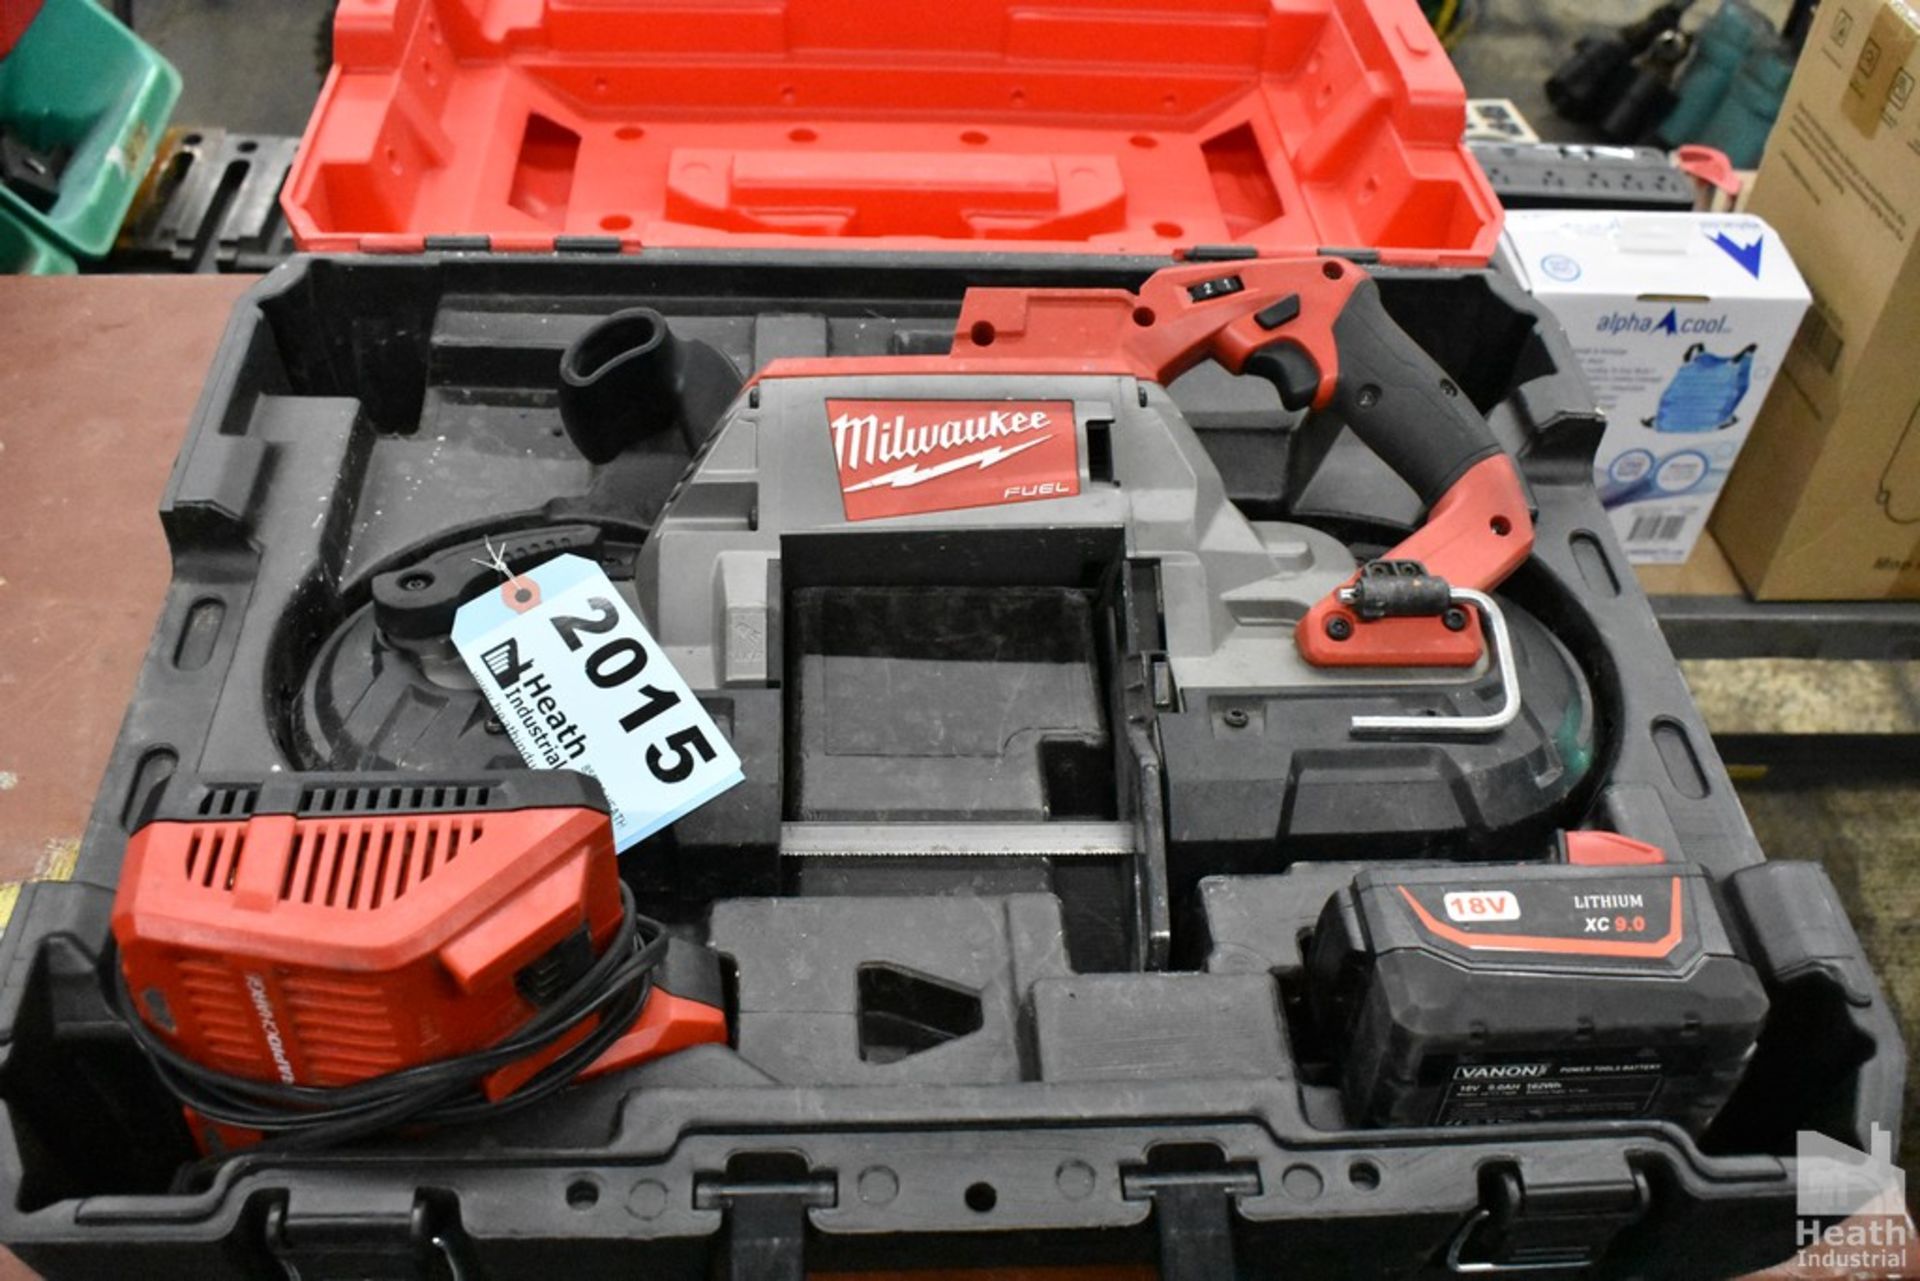 MILWAUKEE M18 BAND SAW, MODEL 2629-20, WITH CHARGER AND BATTERY, IN CASE